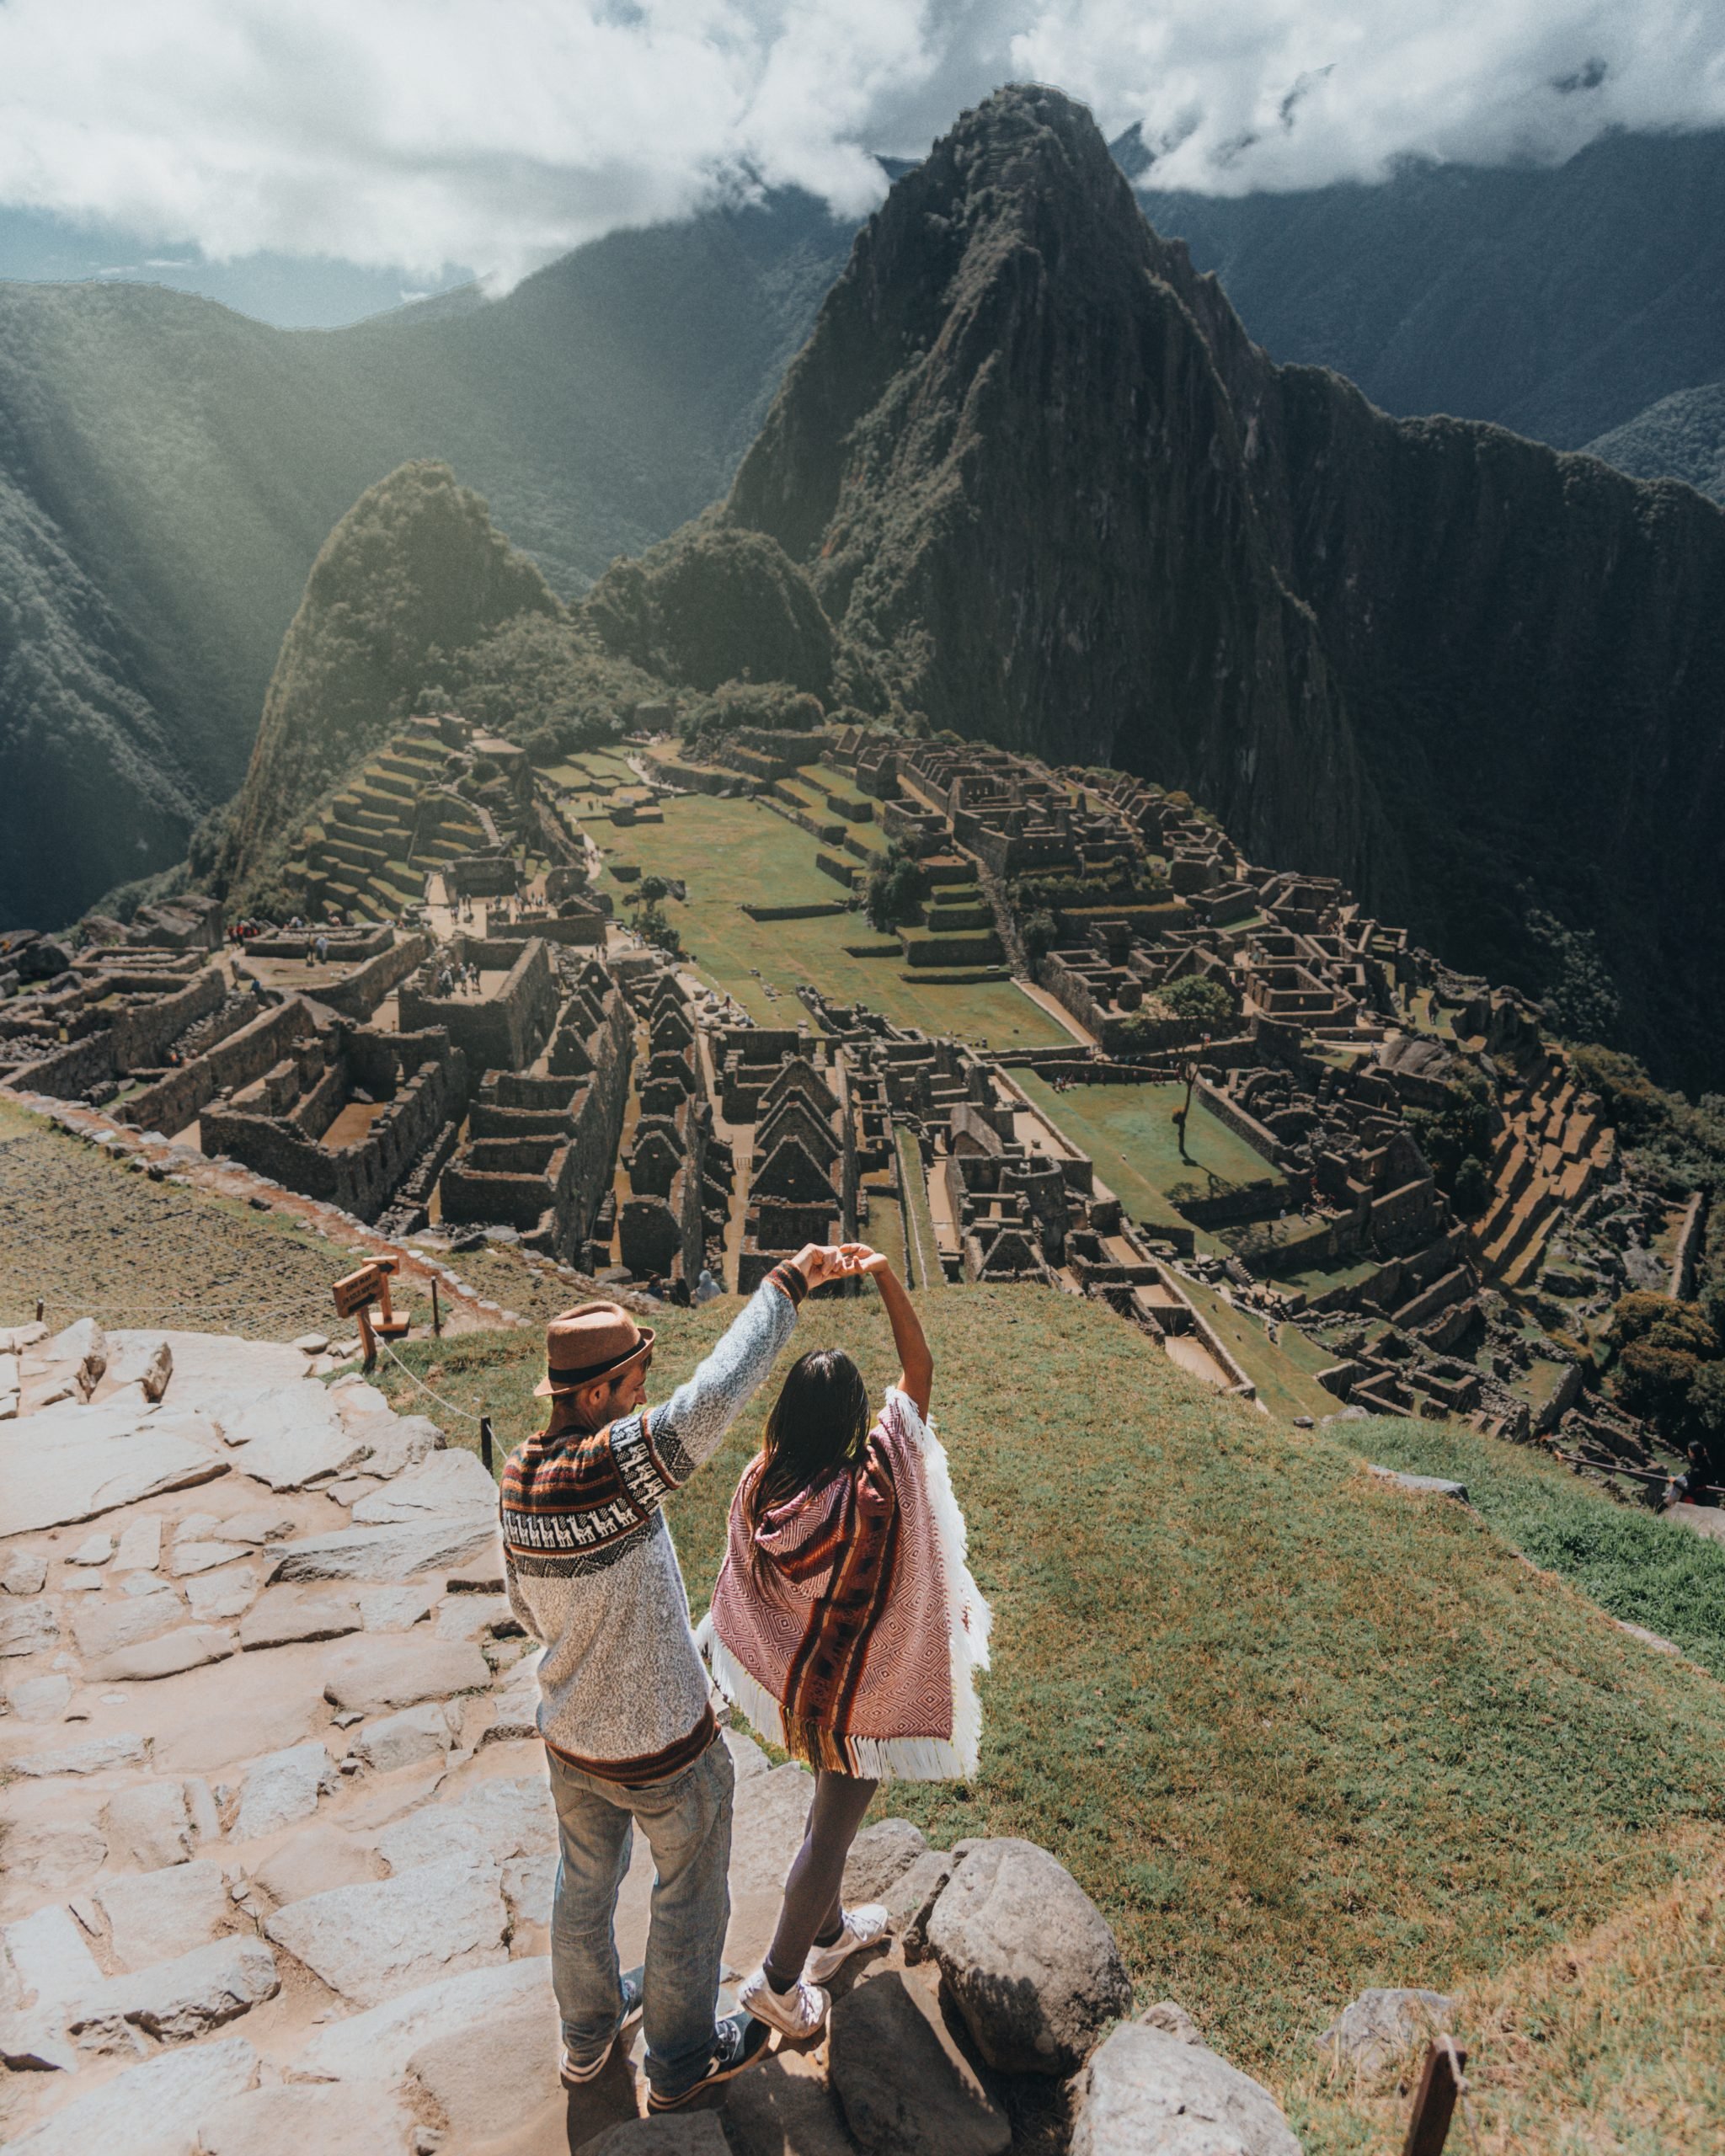 How To Get From Cusco Airport To Machu Pichu - All Possible Ways, cheapest way from Cusco airport to Machu Pichu, Cusco airport to Machu Pichu, Cusco Bus Airport, bus from Cusco airport to Machu Pichu, train from Cusco airport to Machu Pichu, taxi Cusco airport to Machu Pichu, Uber Cusco airport to Machu Pichu, rent a car from Cusco airport to Machu Pichu, Cusco to Machu Pichu